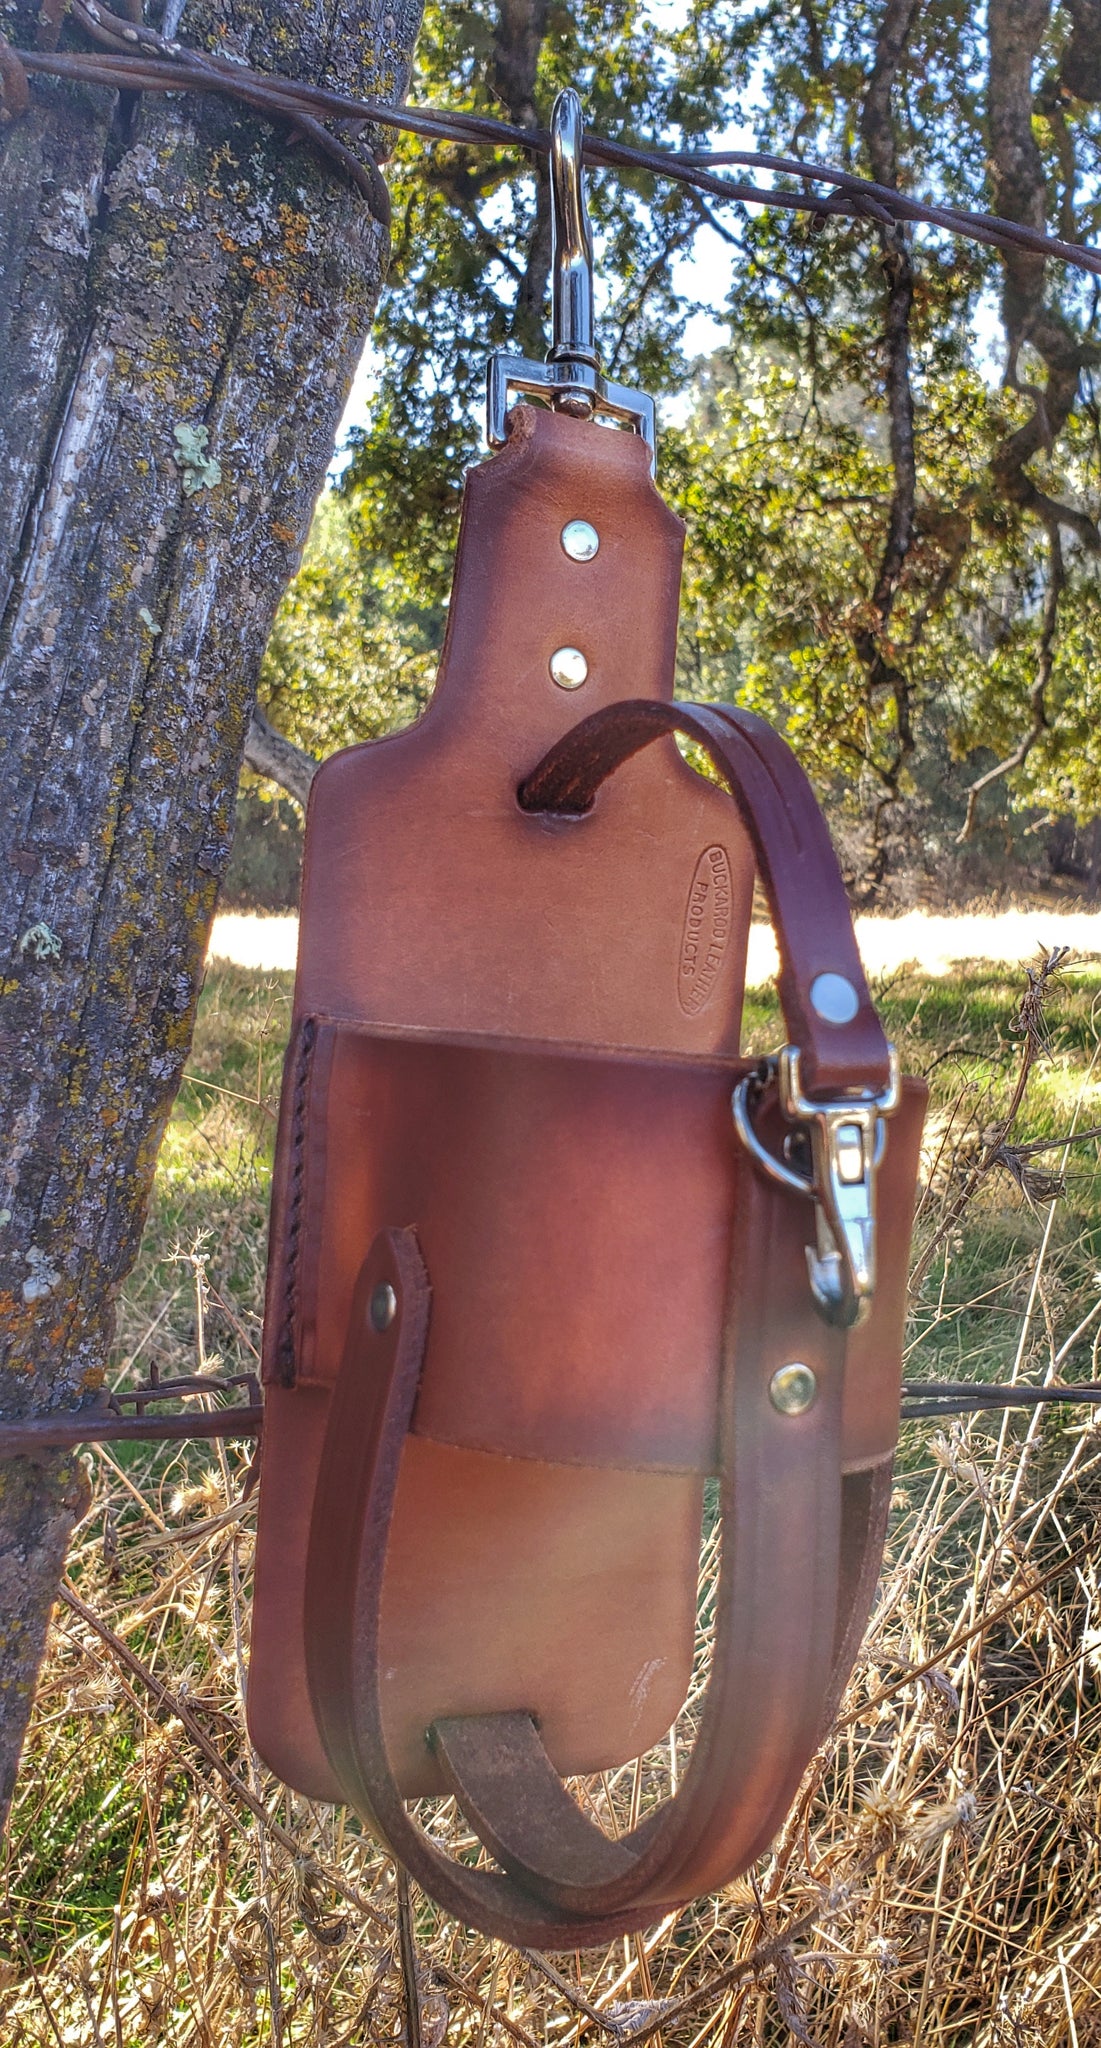 HikerPouch - Leather Water Bottle Carrying Pouch for Hydro Flasks,  Nalgenes, and Other Large Bottles